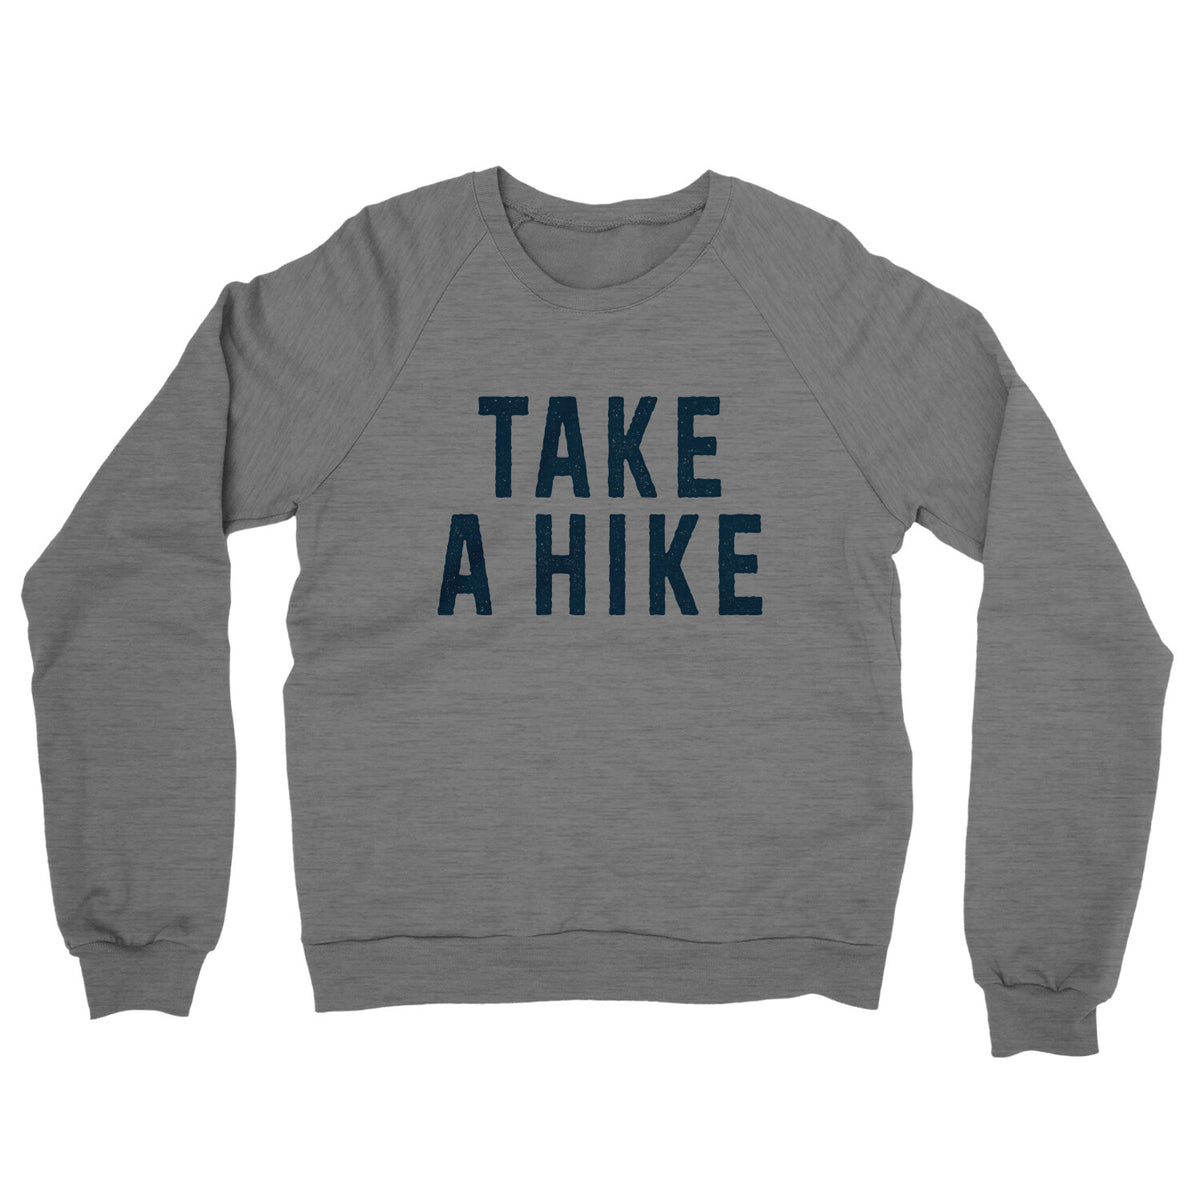 Take a Hike in Graphite Heather Color